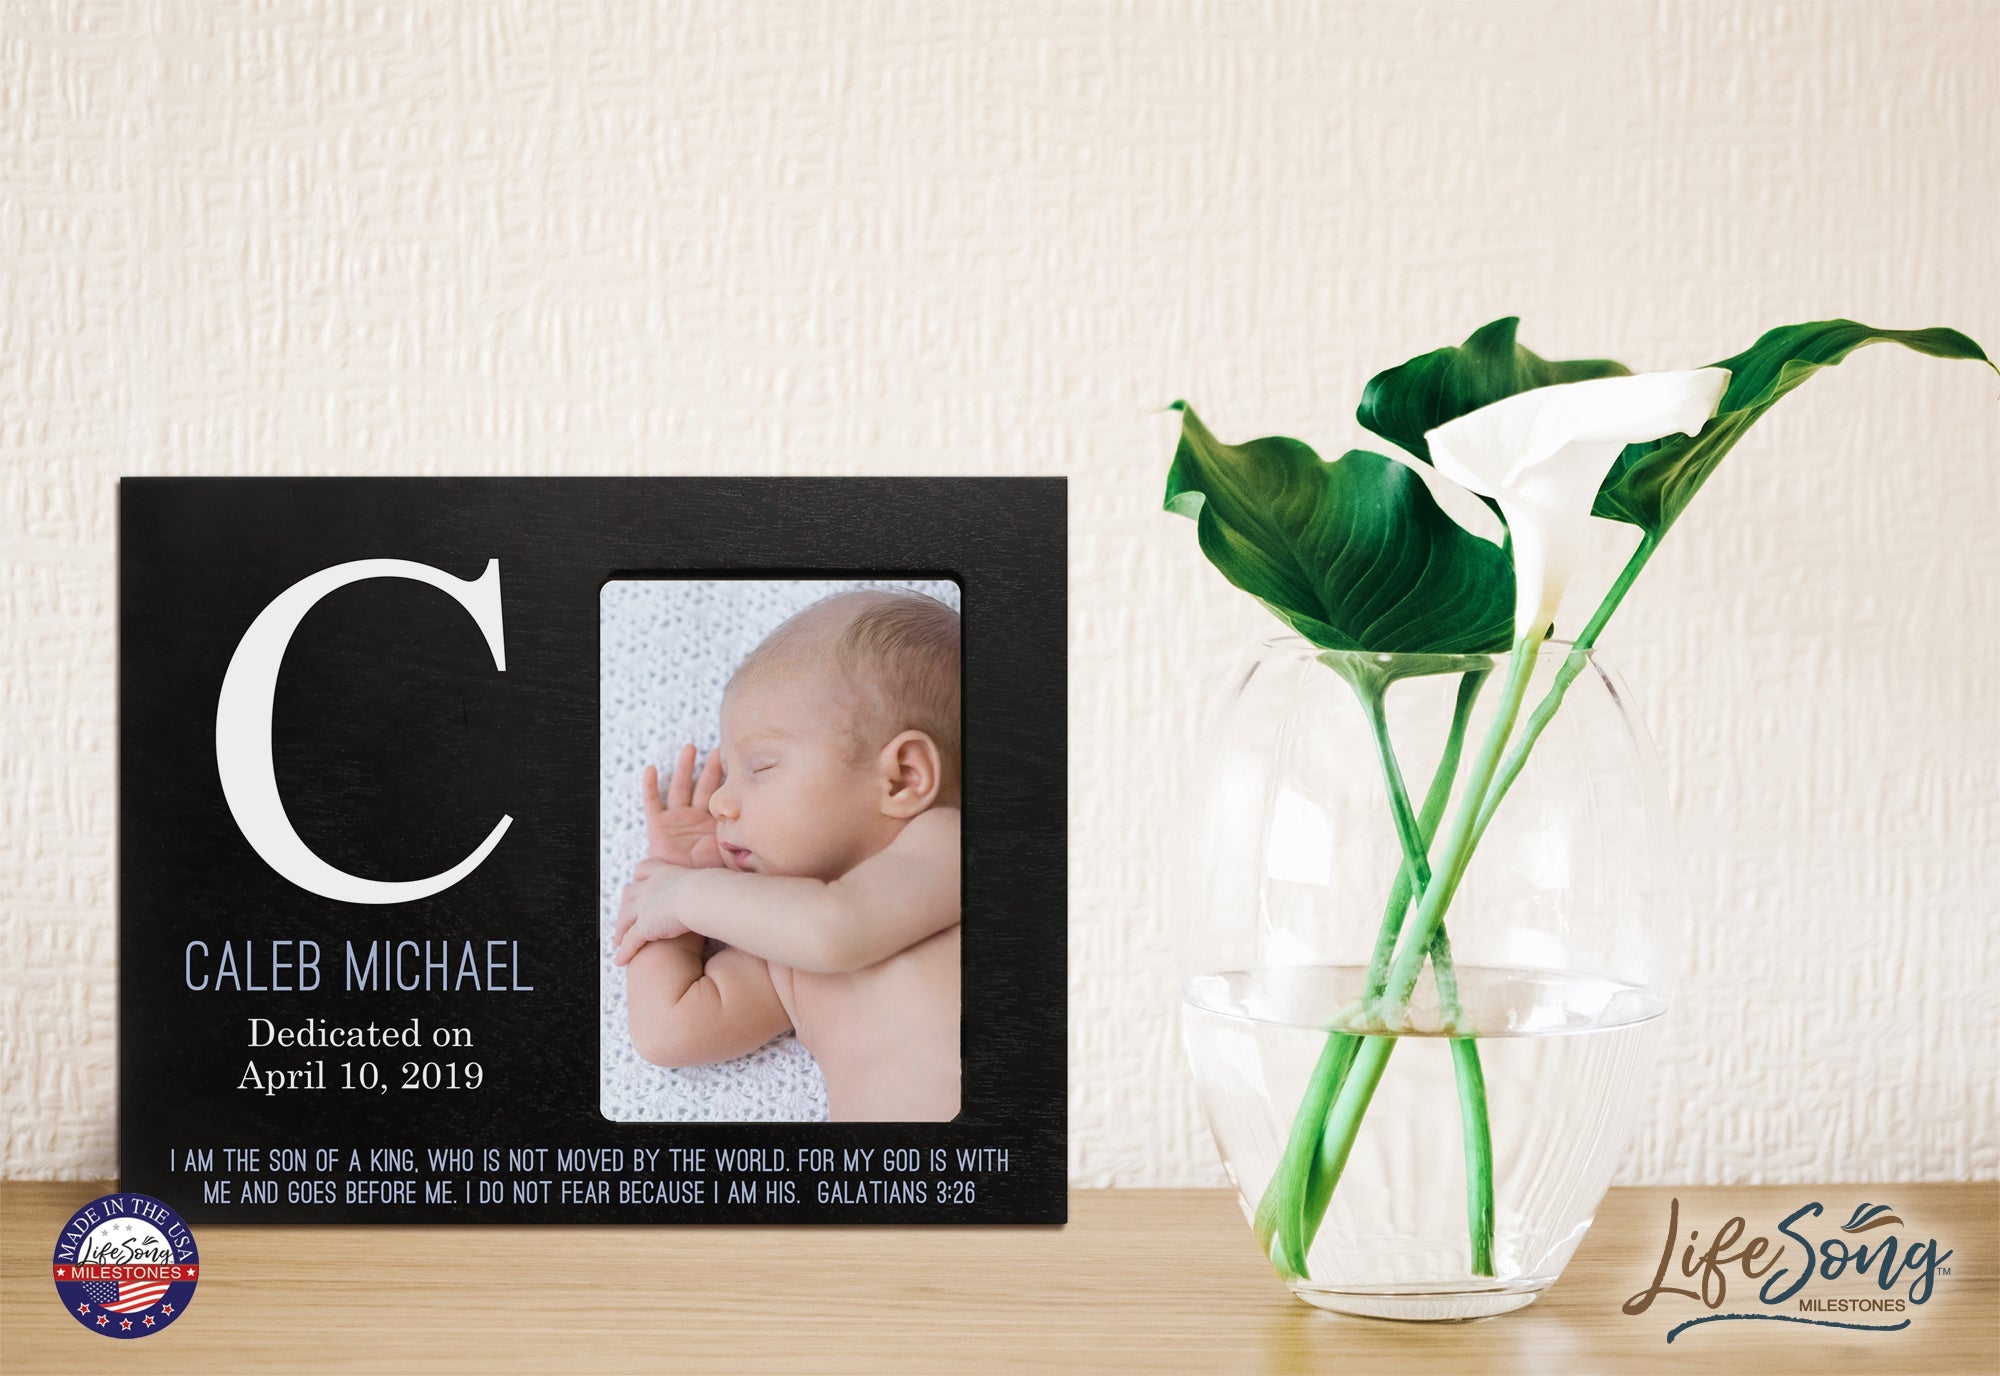 Baby Birth Announcement Photo Frame For Boys and Girls The King - LifeSong Milestones